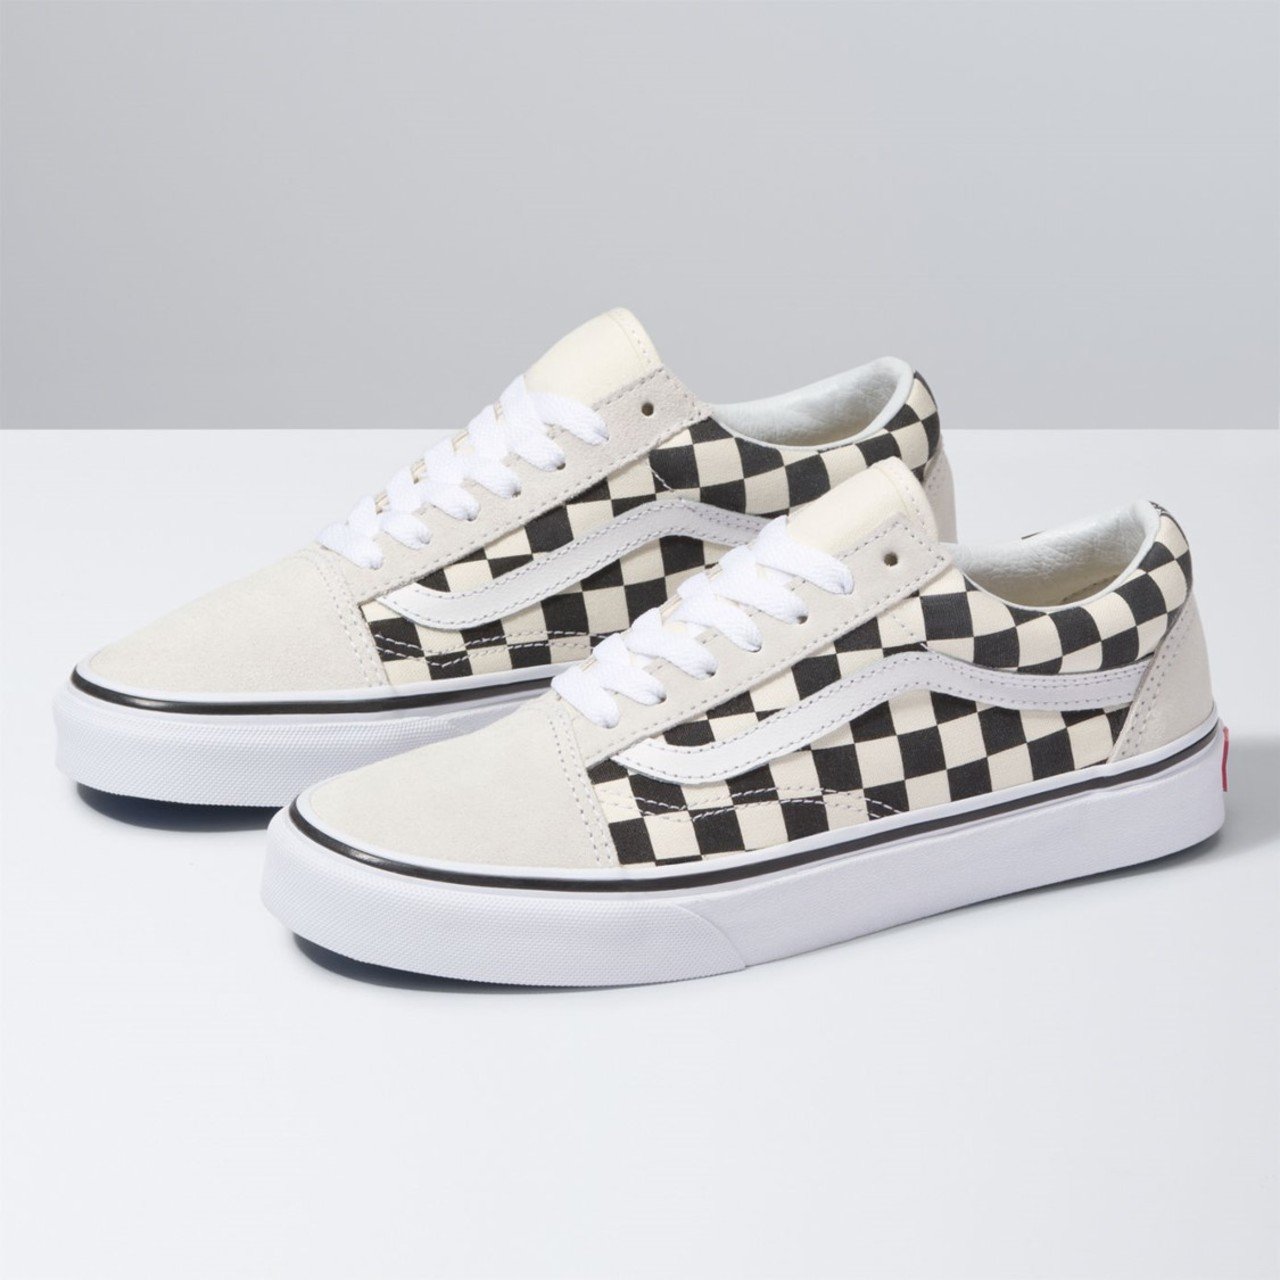 Checkerboard Vans Laced | peacecommission.kdsg.gov.ng